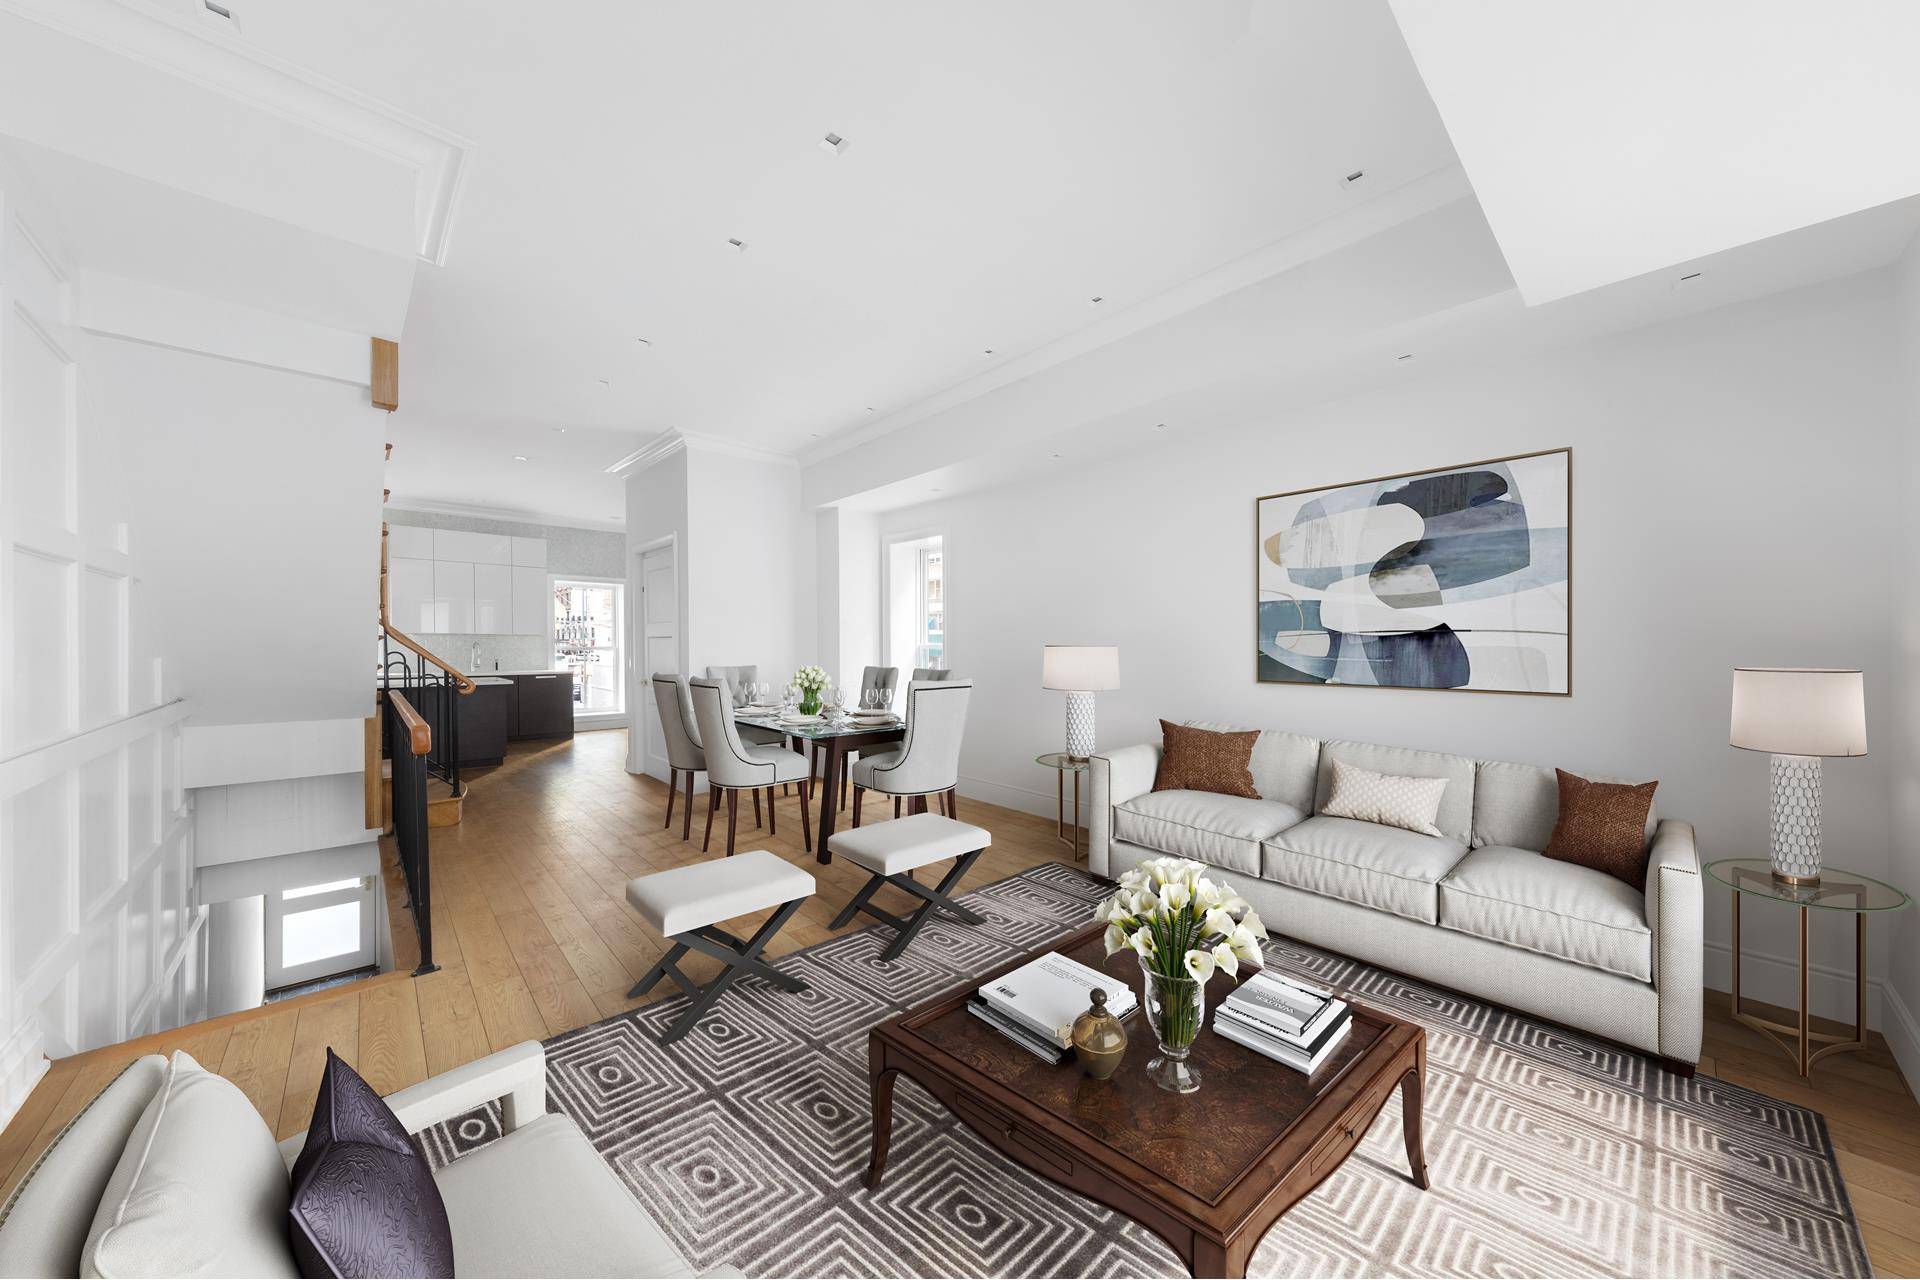 134 East 36th Street is a meticulously renovated single family home that sits perfectly in the famed Murray Hill Historic District.